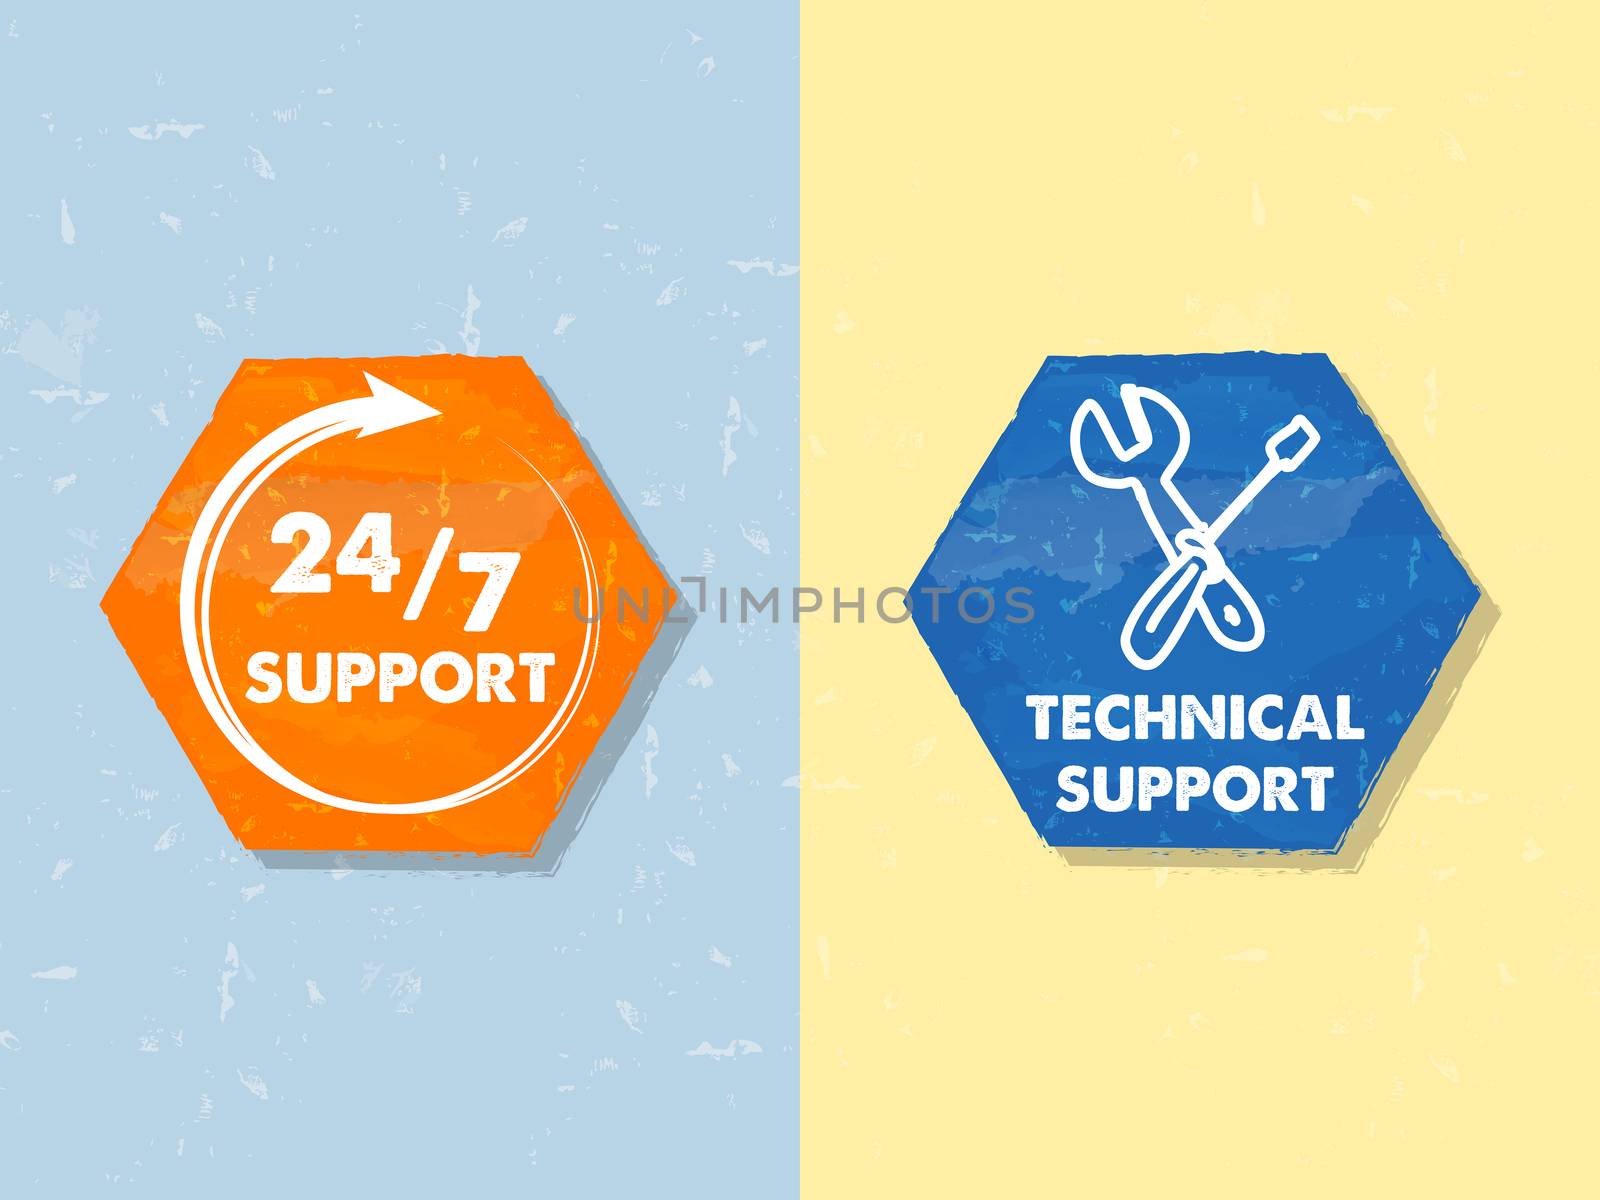 24/7 support and technical support with tools sign, text in two colorful grunge flat design hexagons with symbols, business attendance concept labels